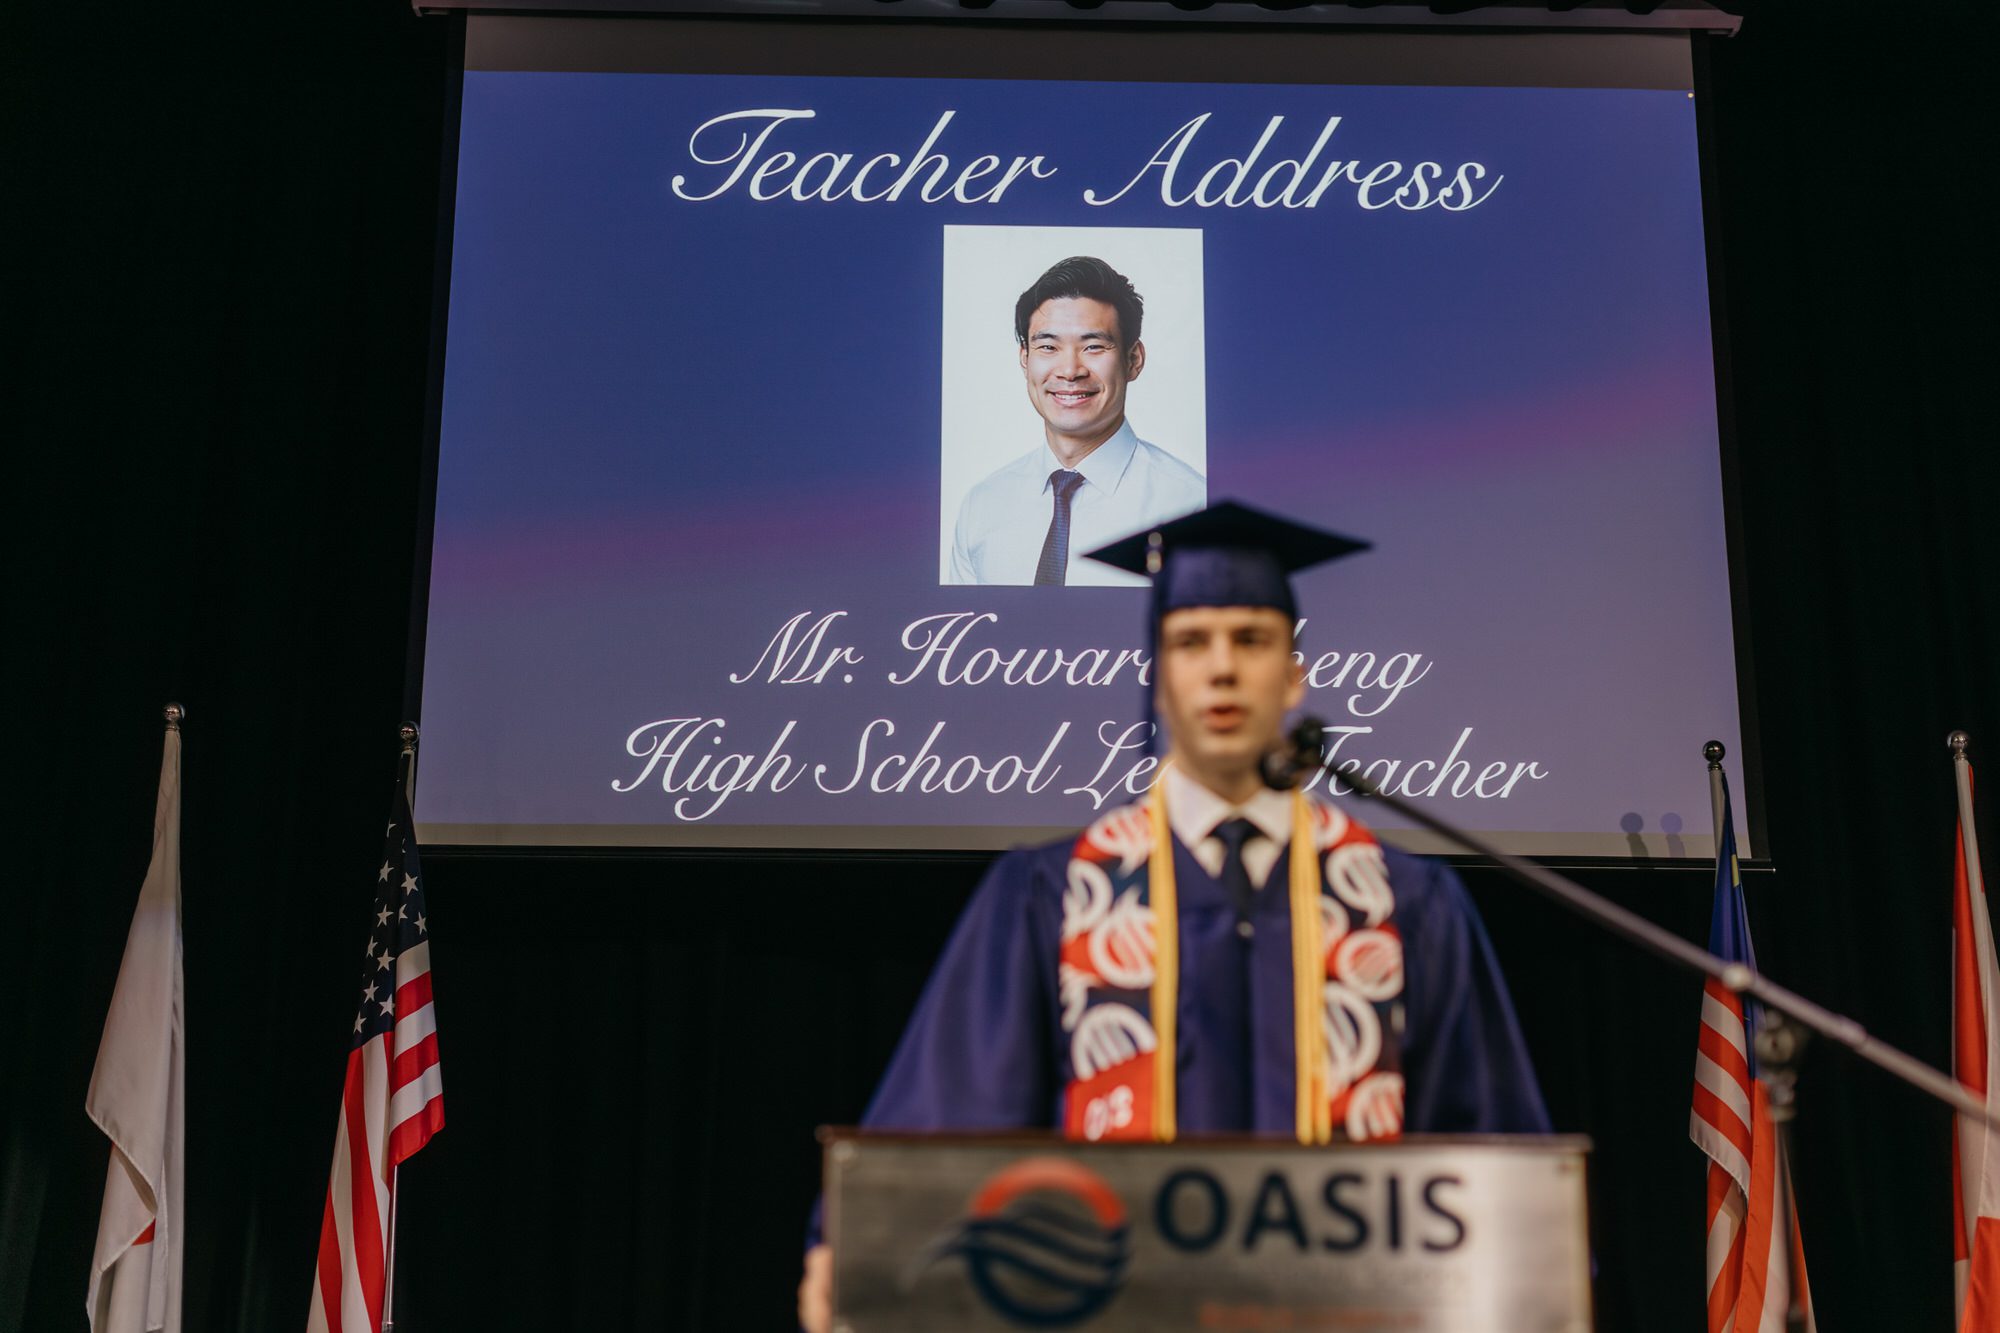 Precious moments being captured by the photographer, ensuring that memories from the Oasis International School 2023 graduation ceremony last for eternity.